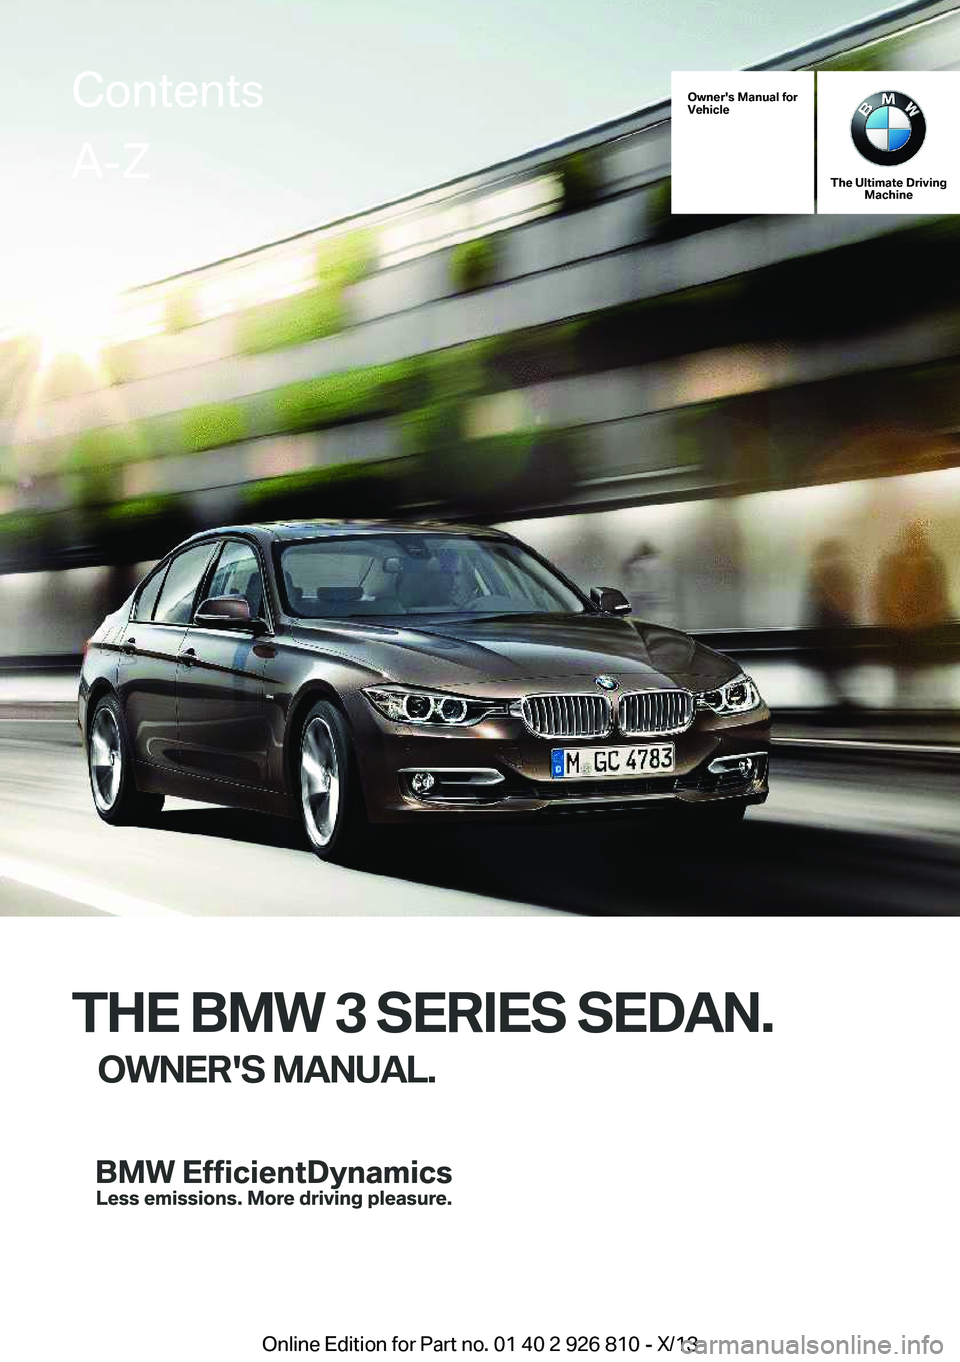 BMW 320i XDRIVE SEDAN 2013  Owners Manual Owner's Manual for
Vehicle
The Ultimate Driving Machine
THE BMW 3 SERIES SEDAN.
OWNER'S MANUAL.
ContentsA-Z
Online Edition for Part no. 01 40 2 926 810 - X/13   